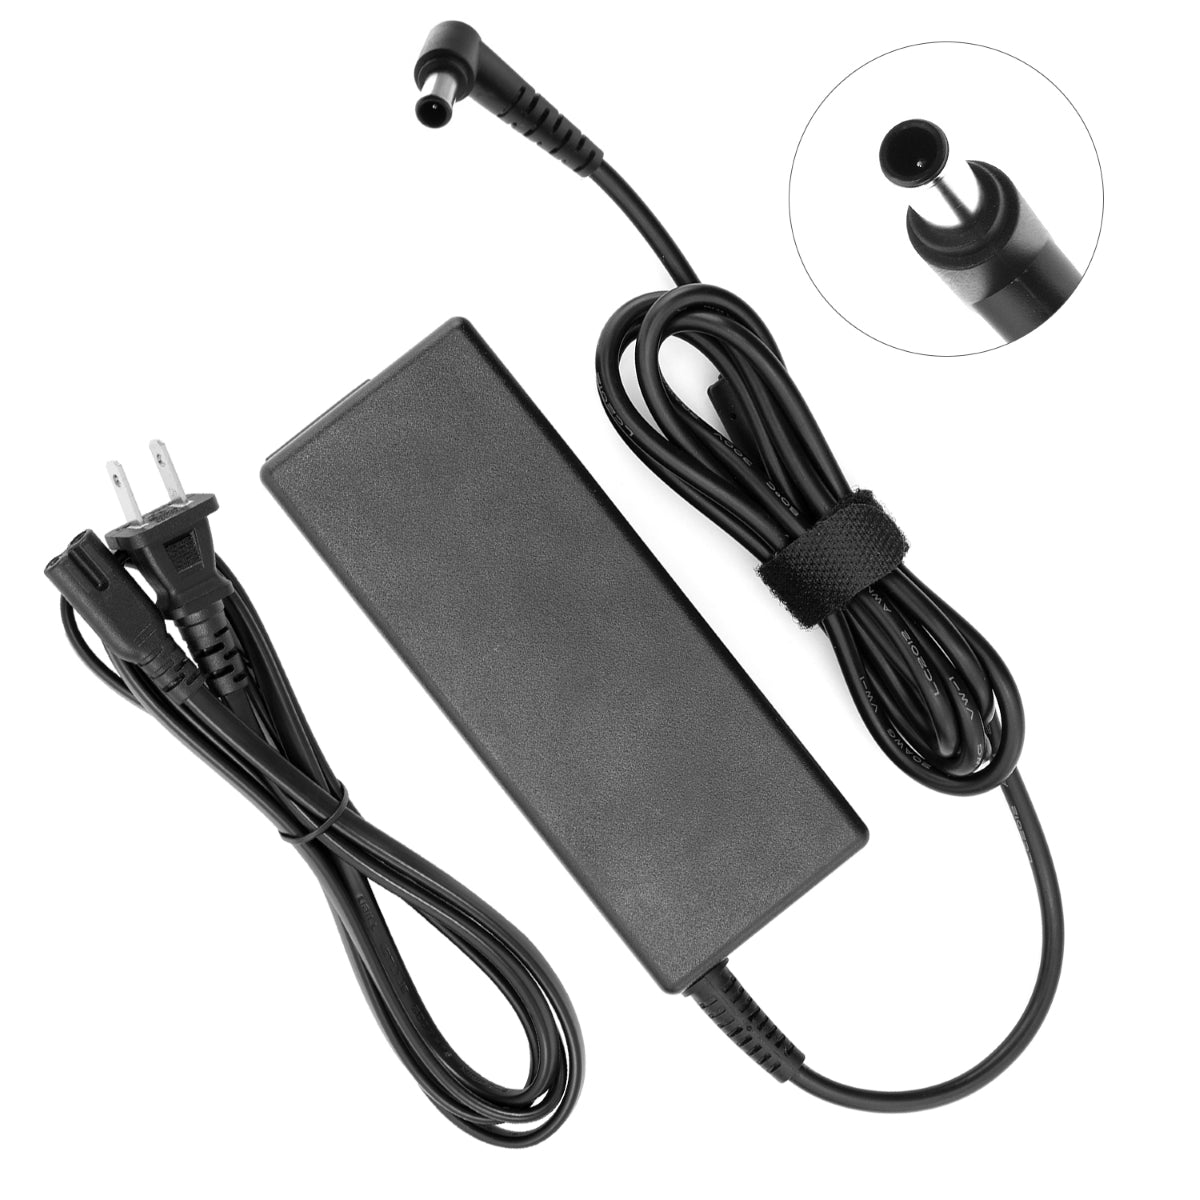 AC Adapter Power Supply for Samsung C27F390 Monitor